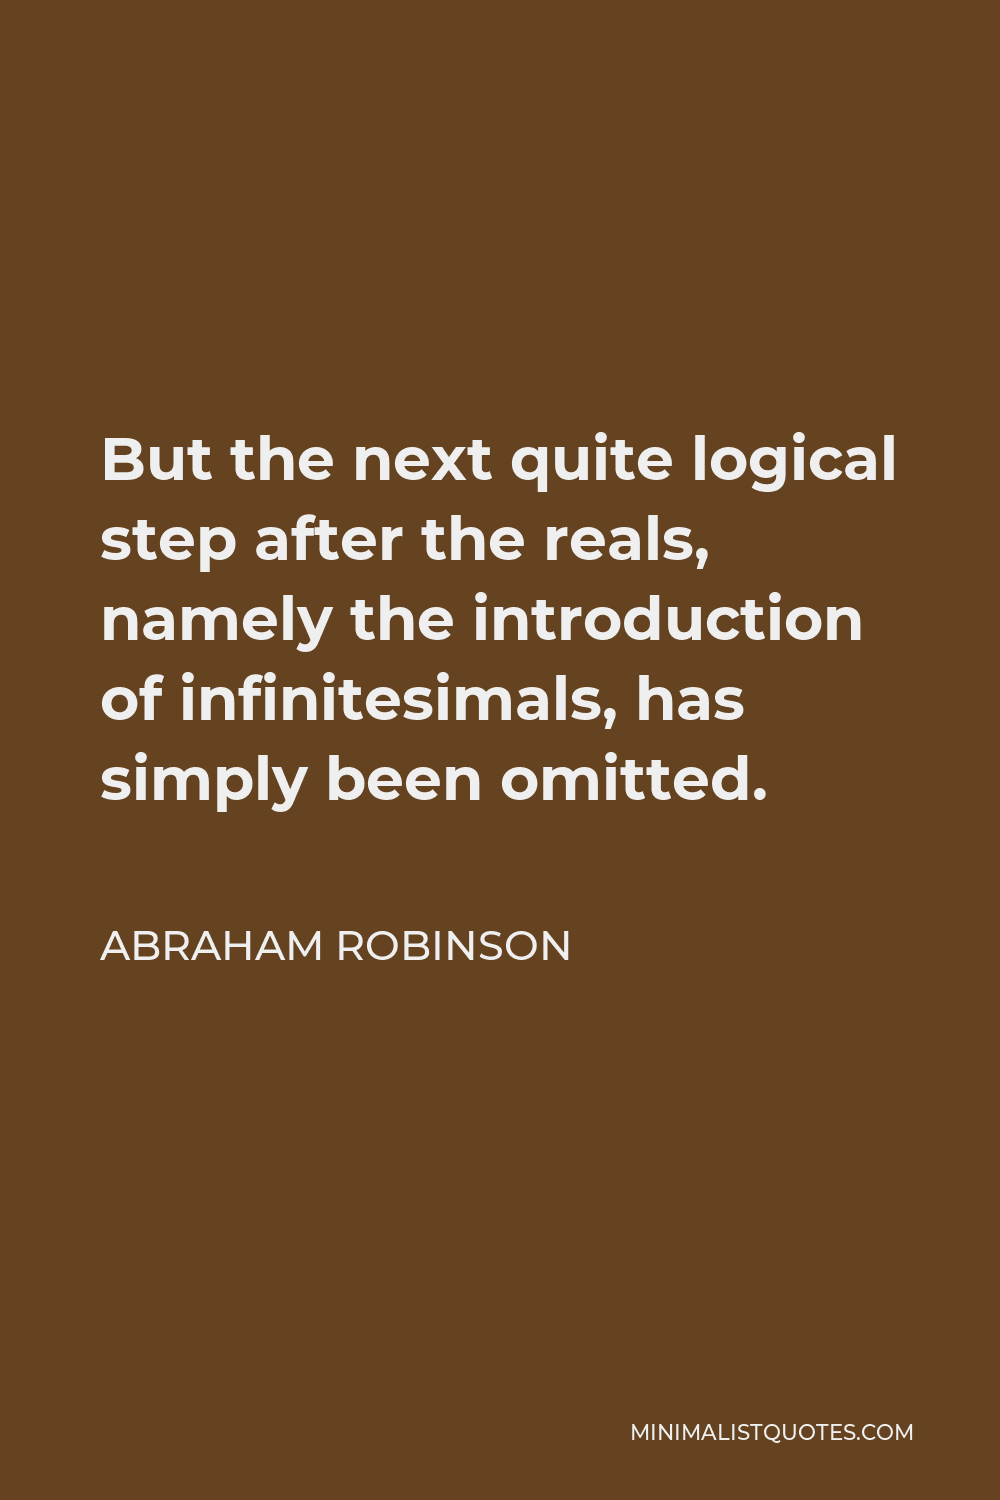 Abraham Robinson Quote - But the next quite logical step after the reals, namely the introduction of infinitesimals, has simply been omitted.